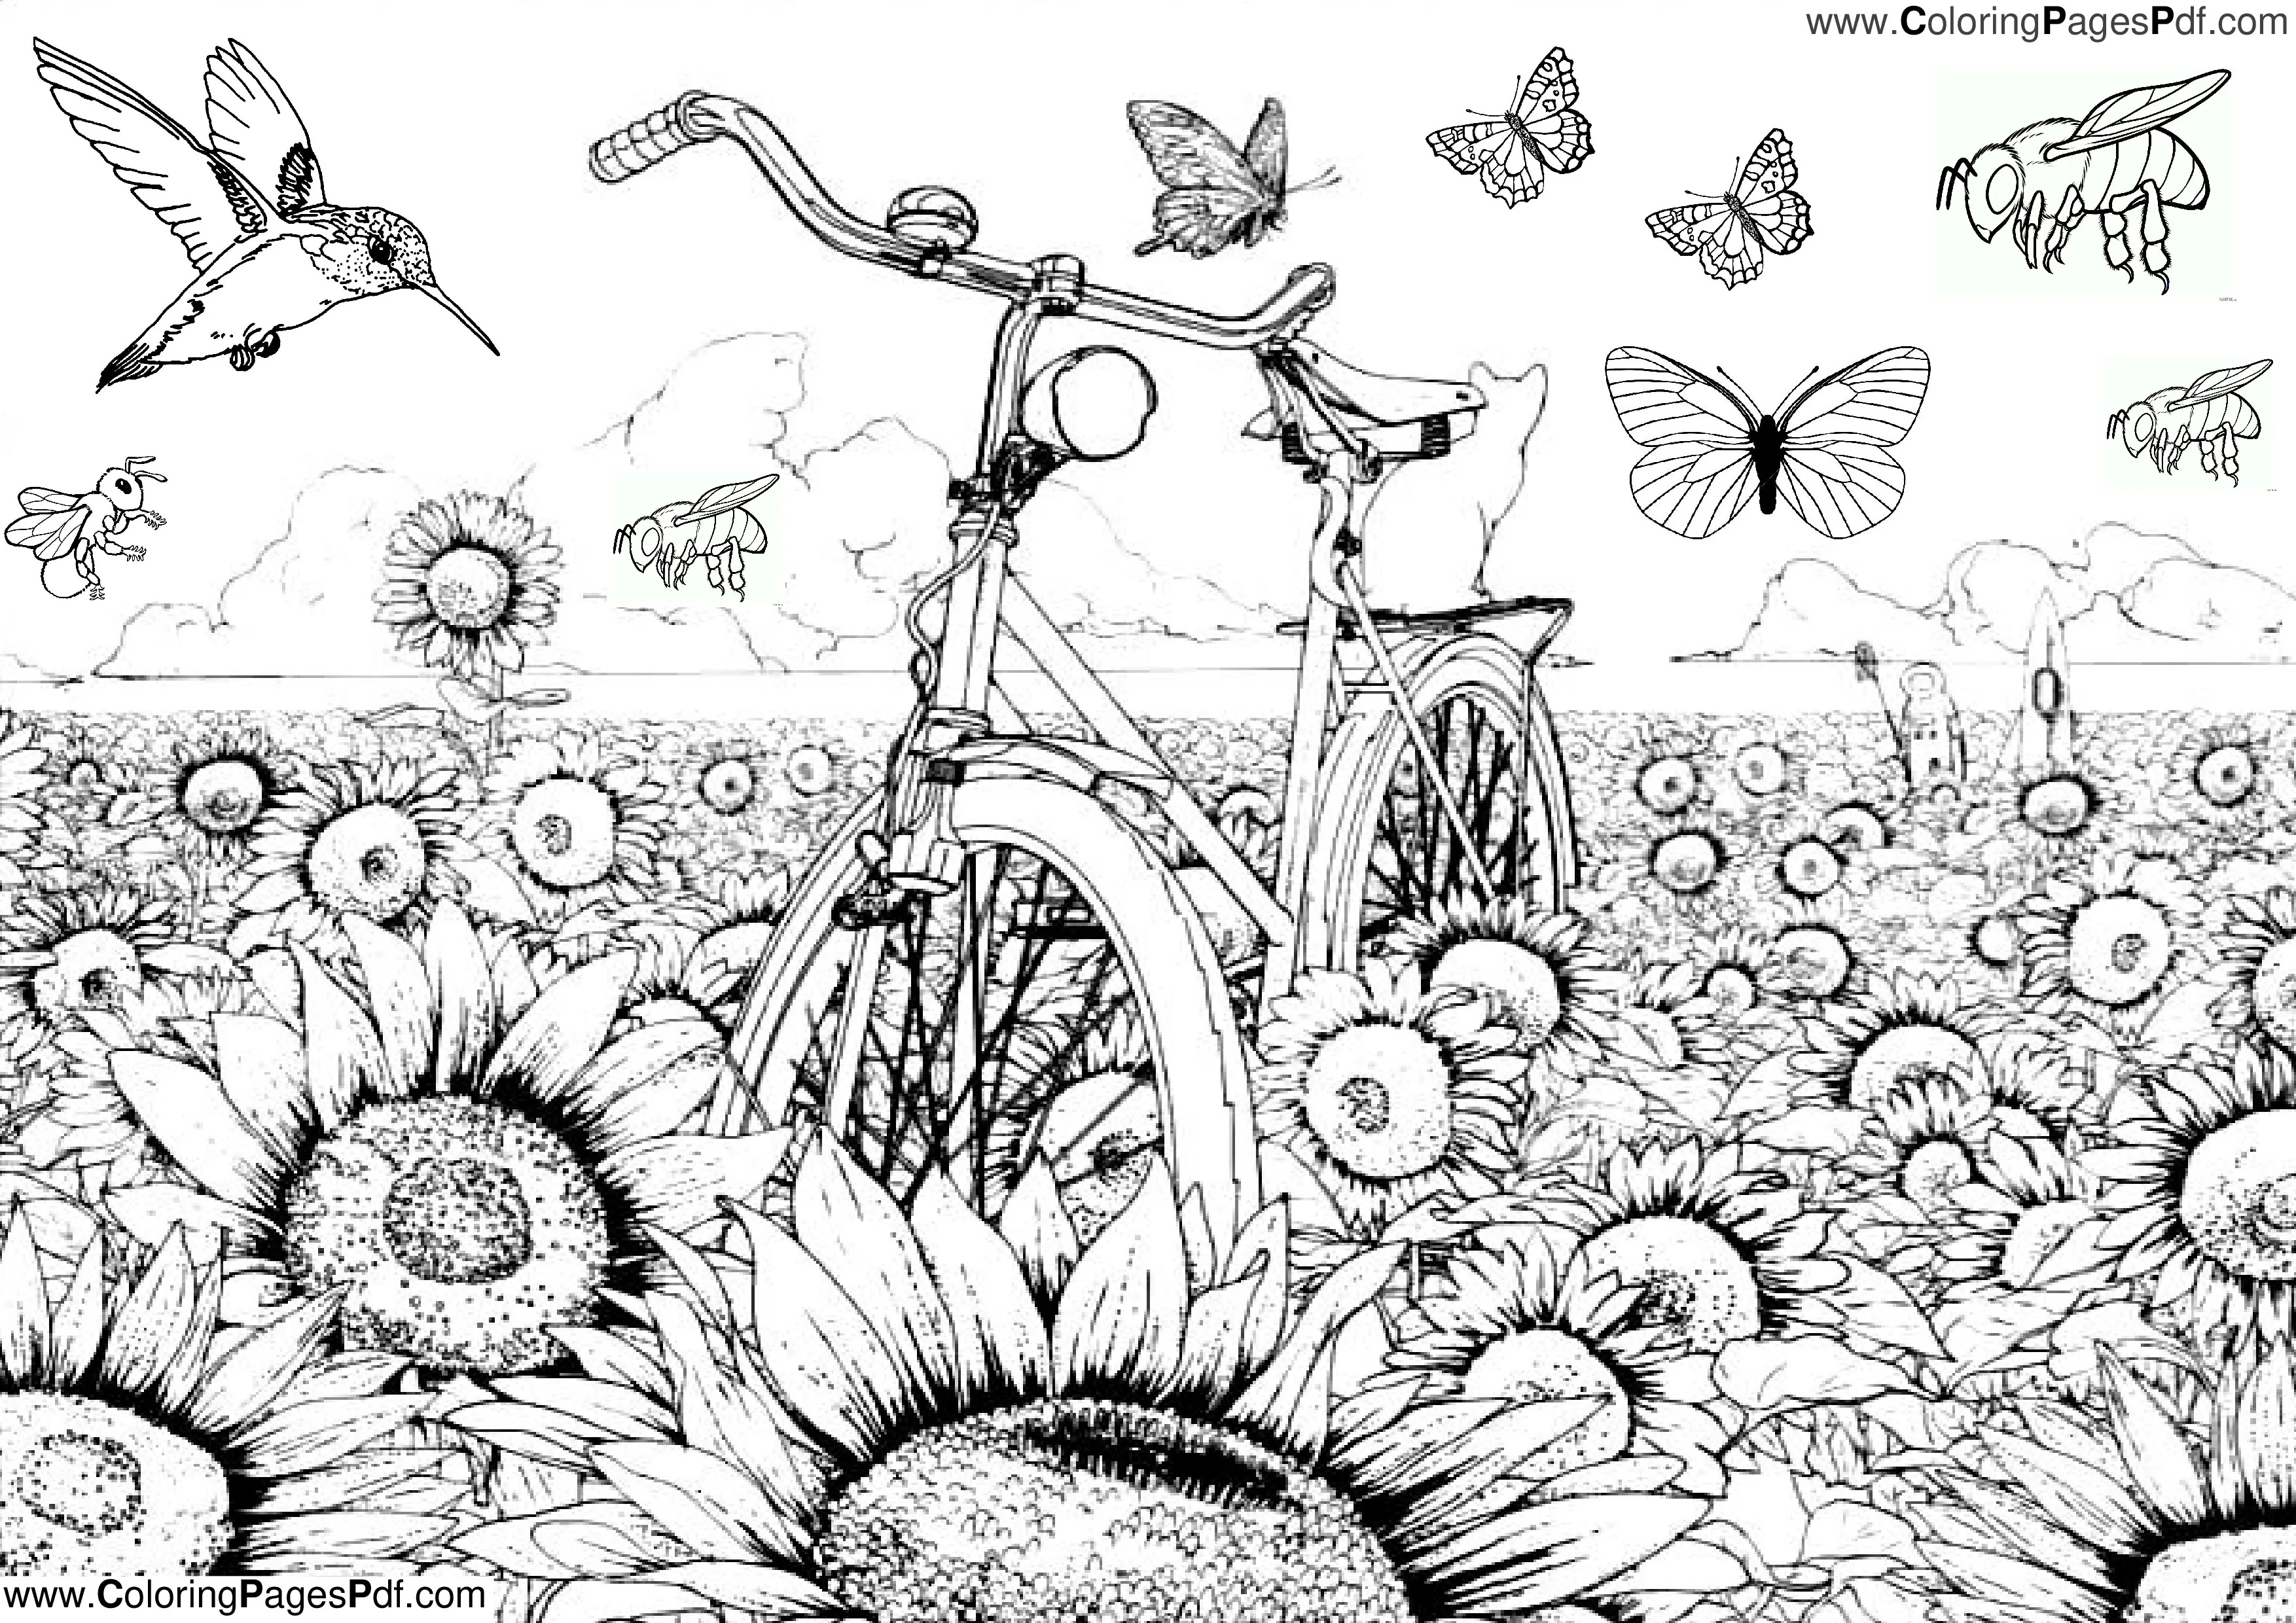 Sunflower coloring page for adults